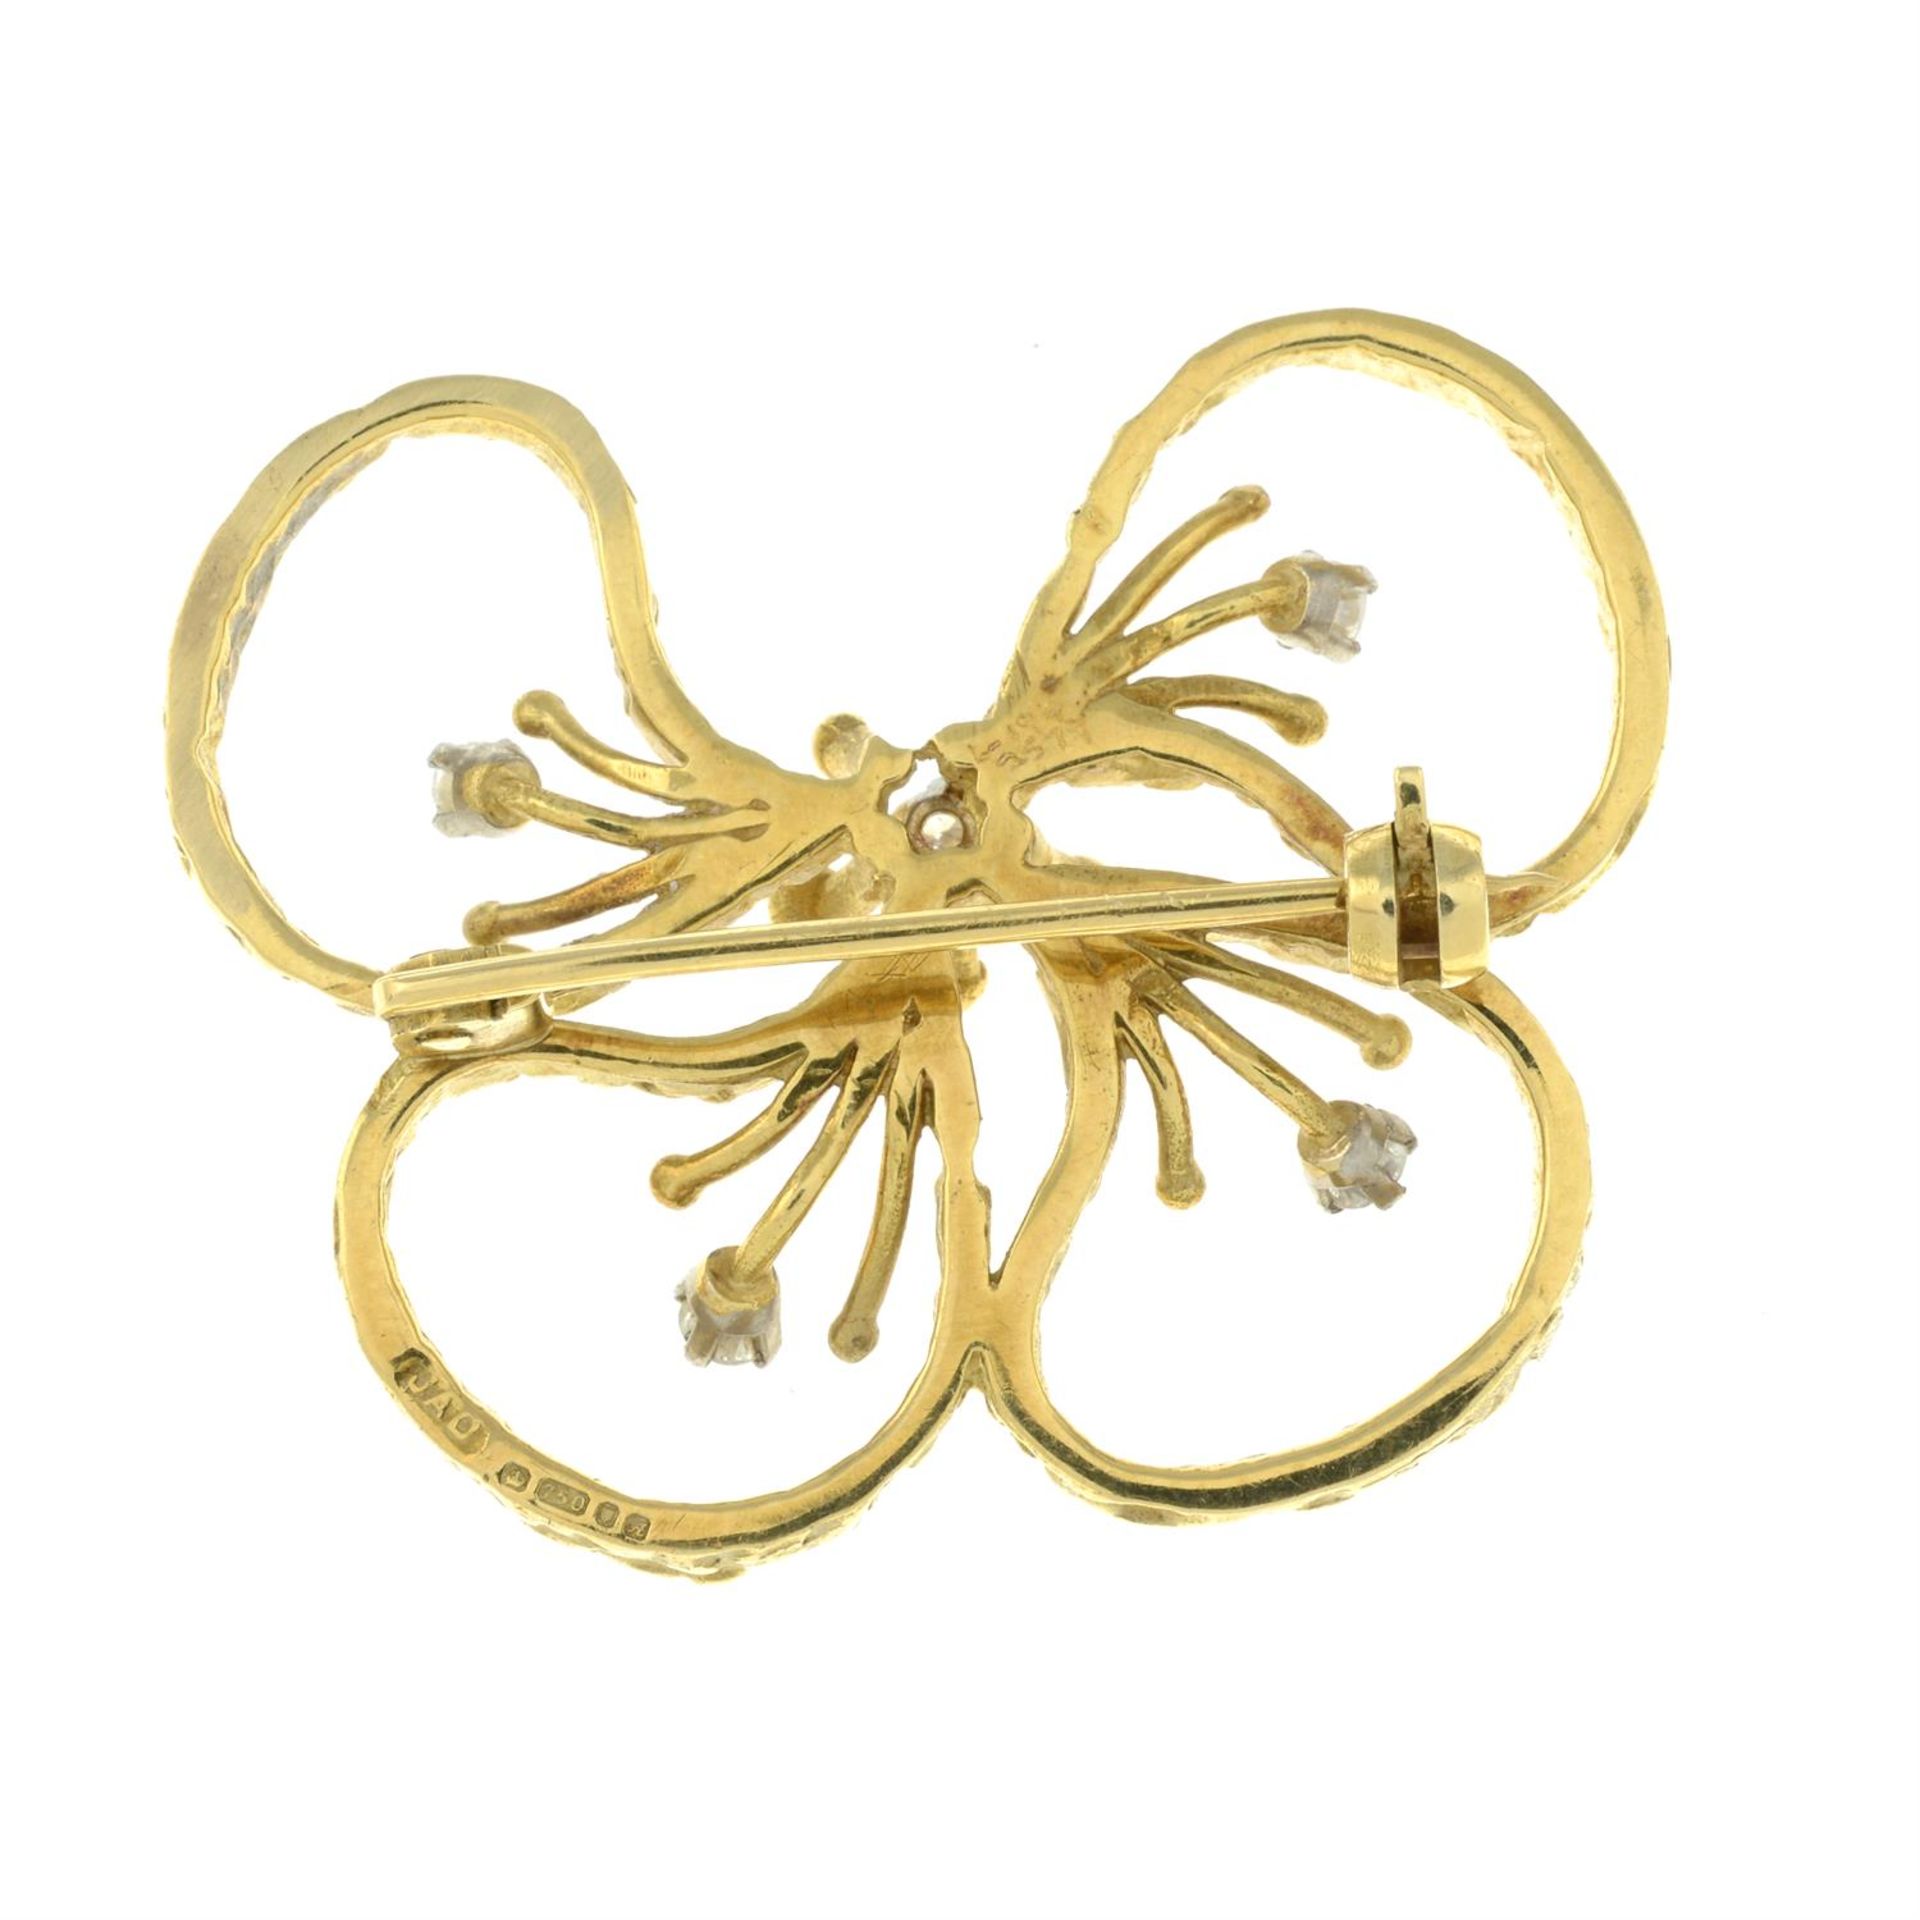 An 18ct gold brilliant-cut diamond abstract floral brooch, by John Donald. - Image 2 of 2